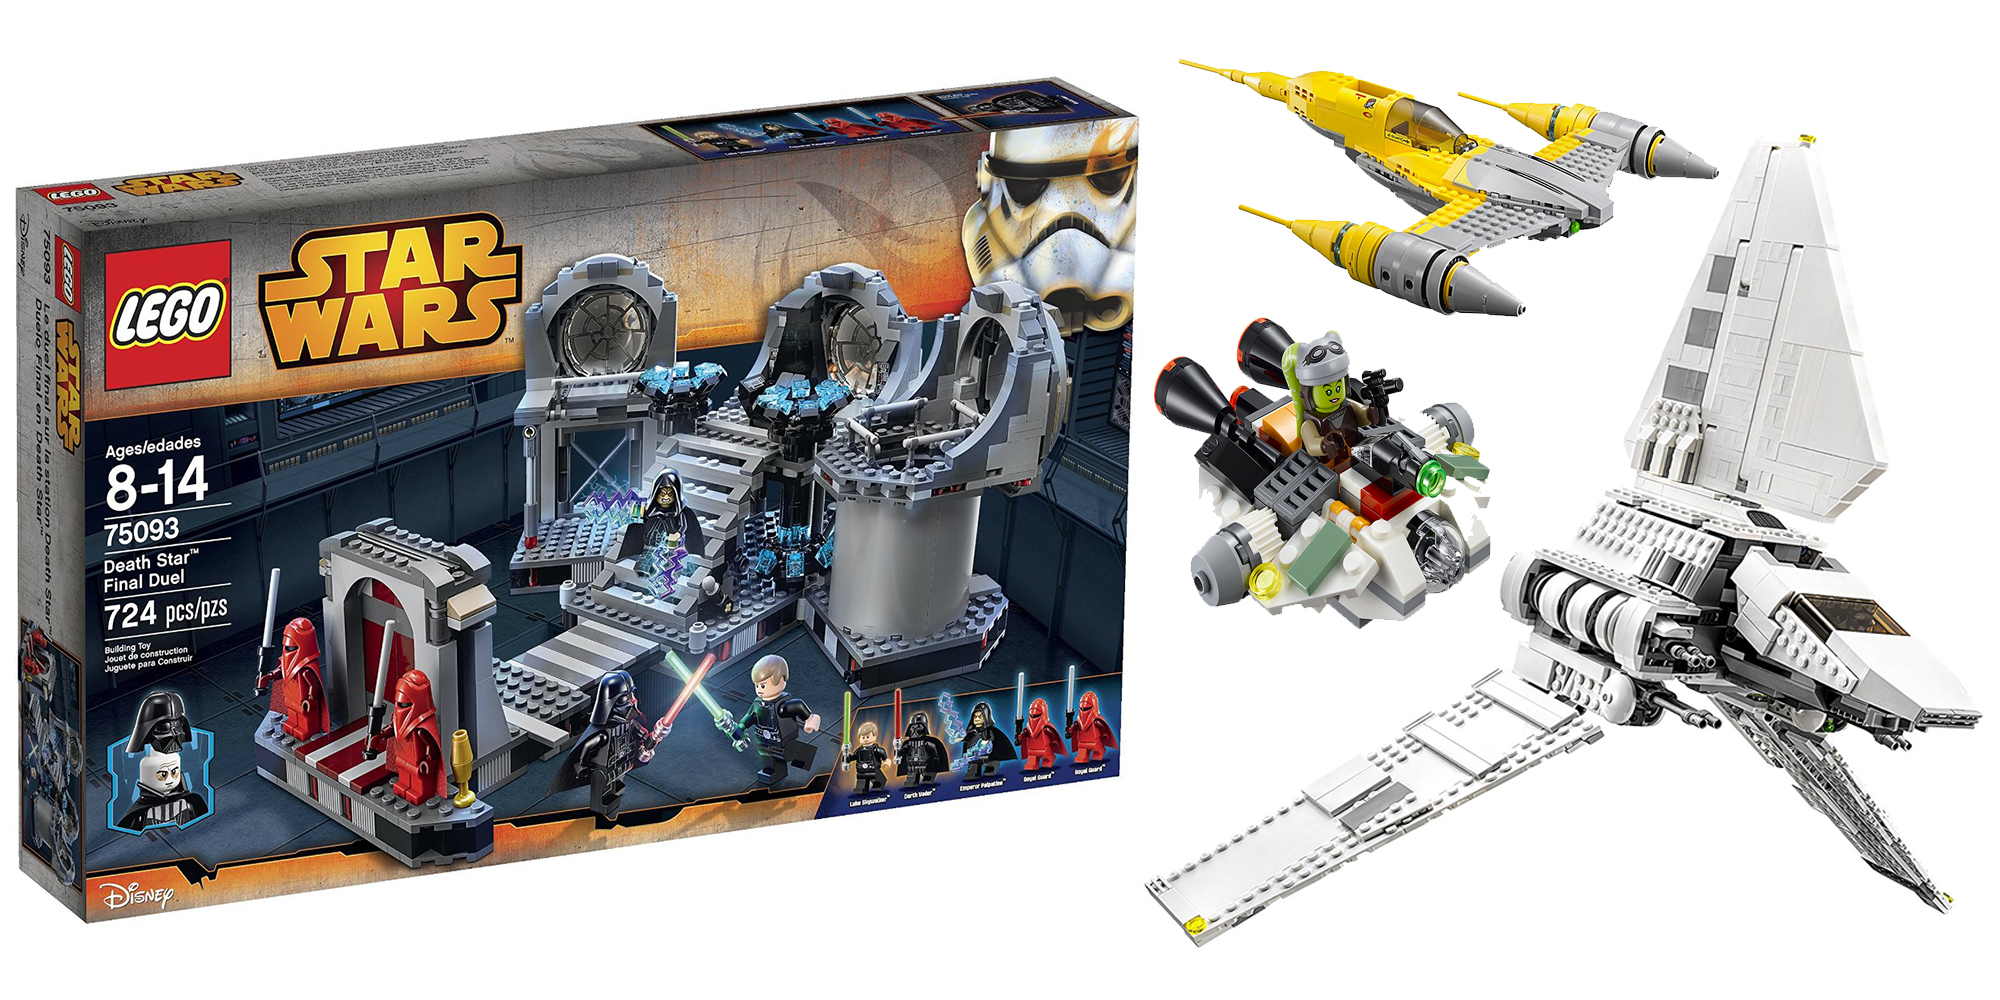 and Target take 20% off popular LEGO Star Wars Kits from $7: Death  Star Duel $50, Imperial Shuttle $64, more